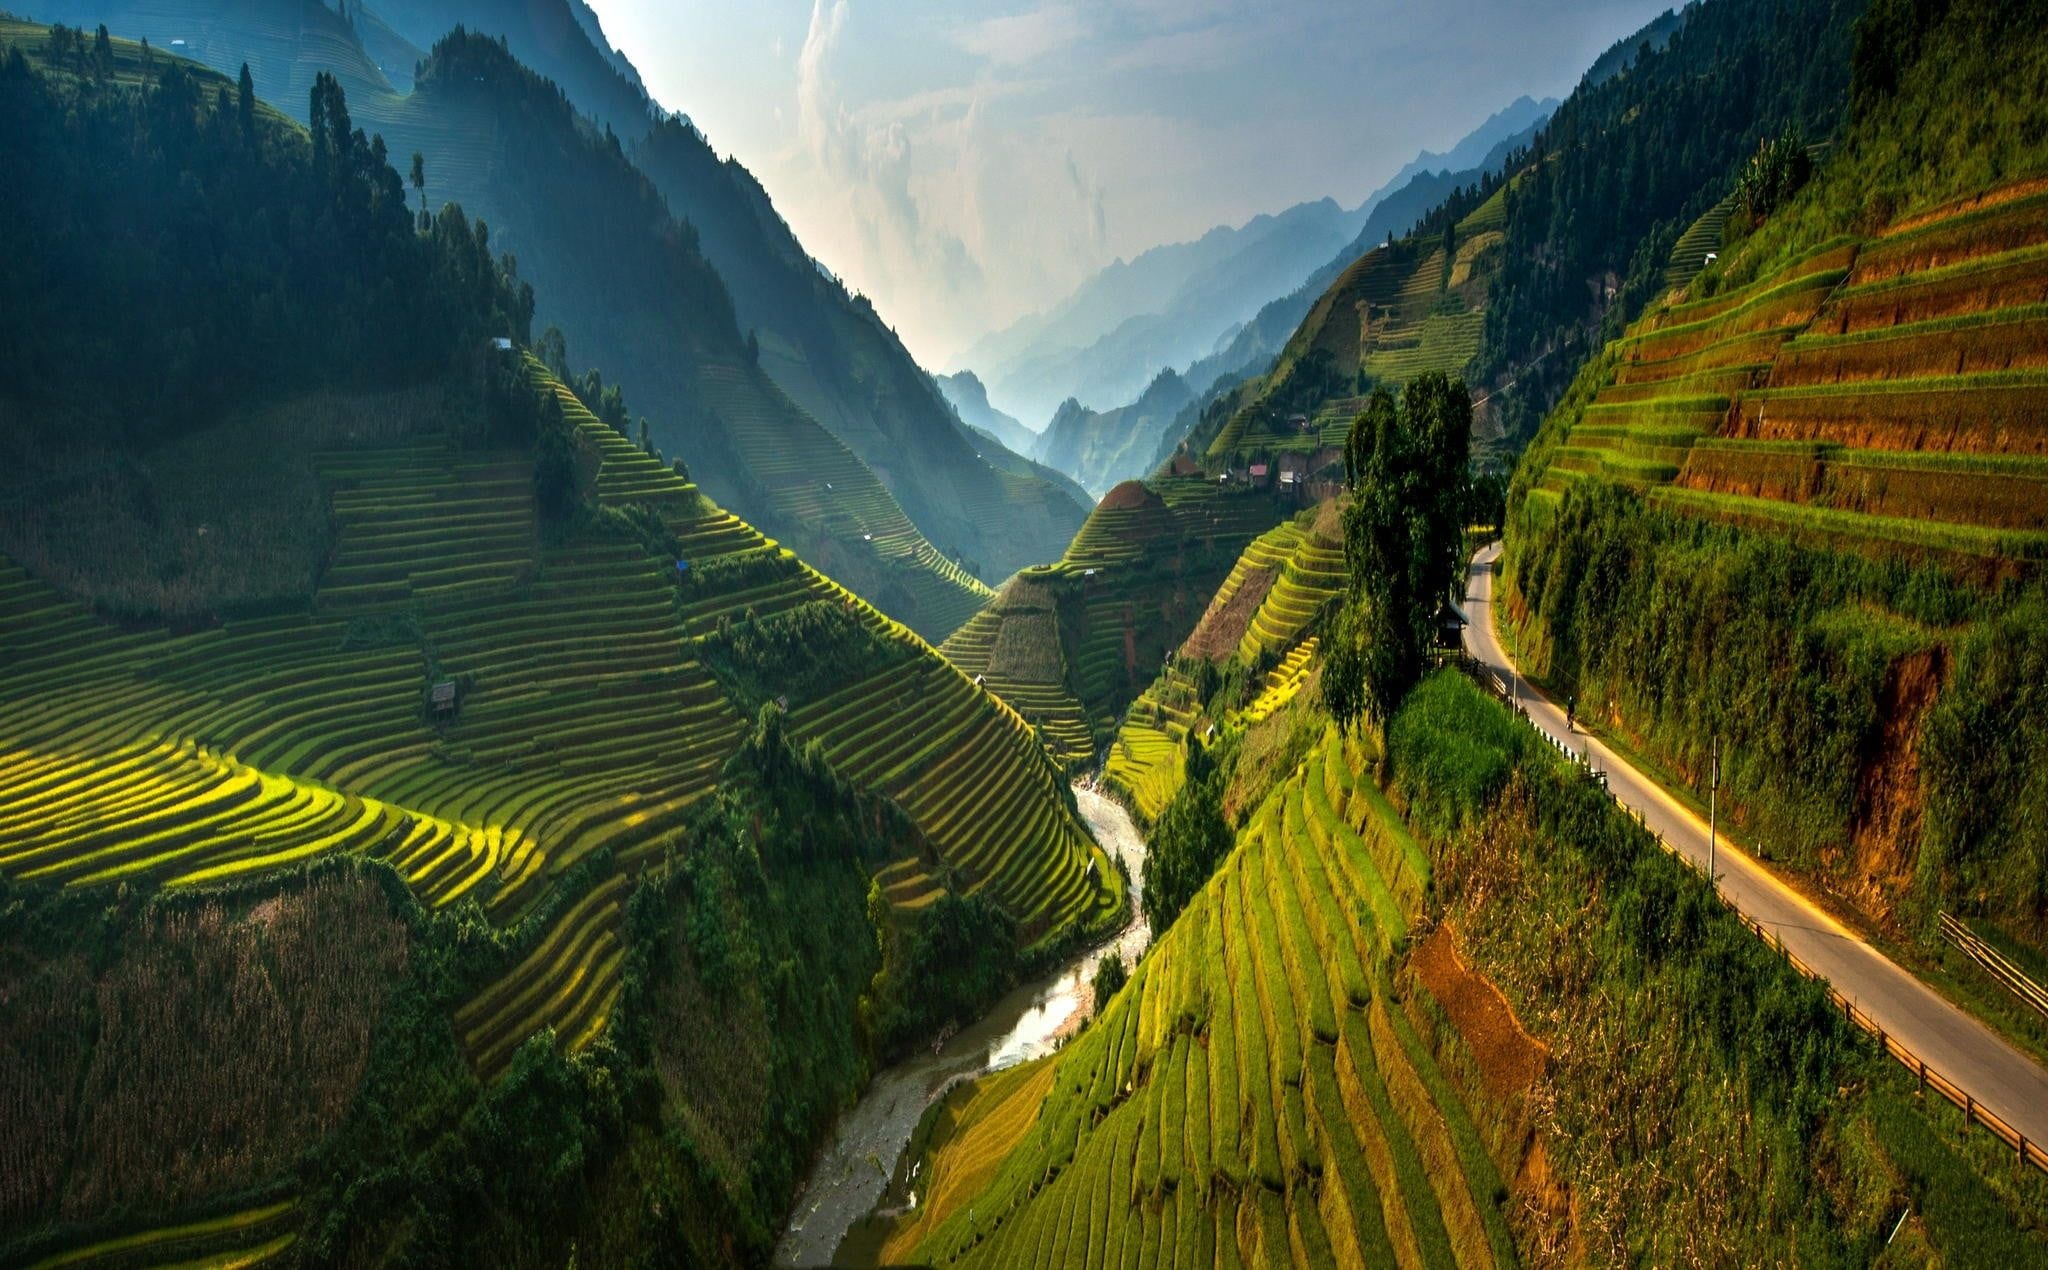 Rice terraces, HD wallpapers, Breathtaking backgrounds, Picture-perfect beauty, 2050x1270 HD Desktop